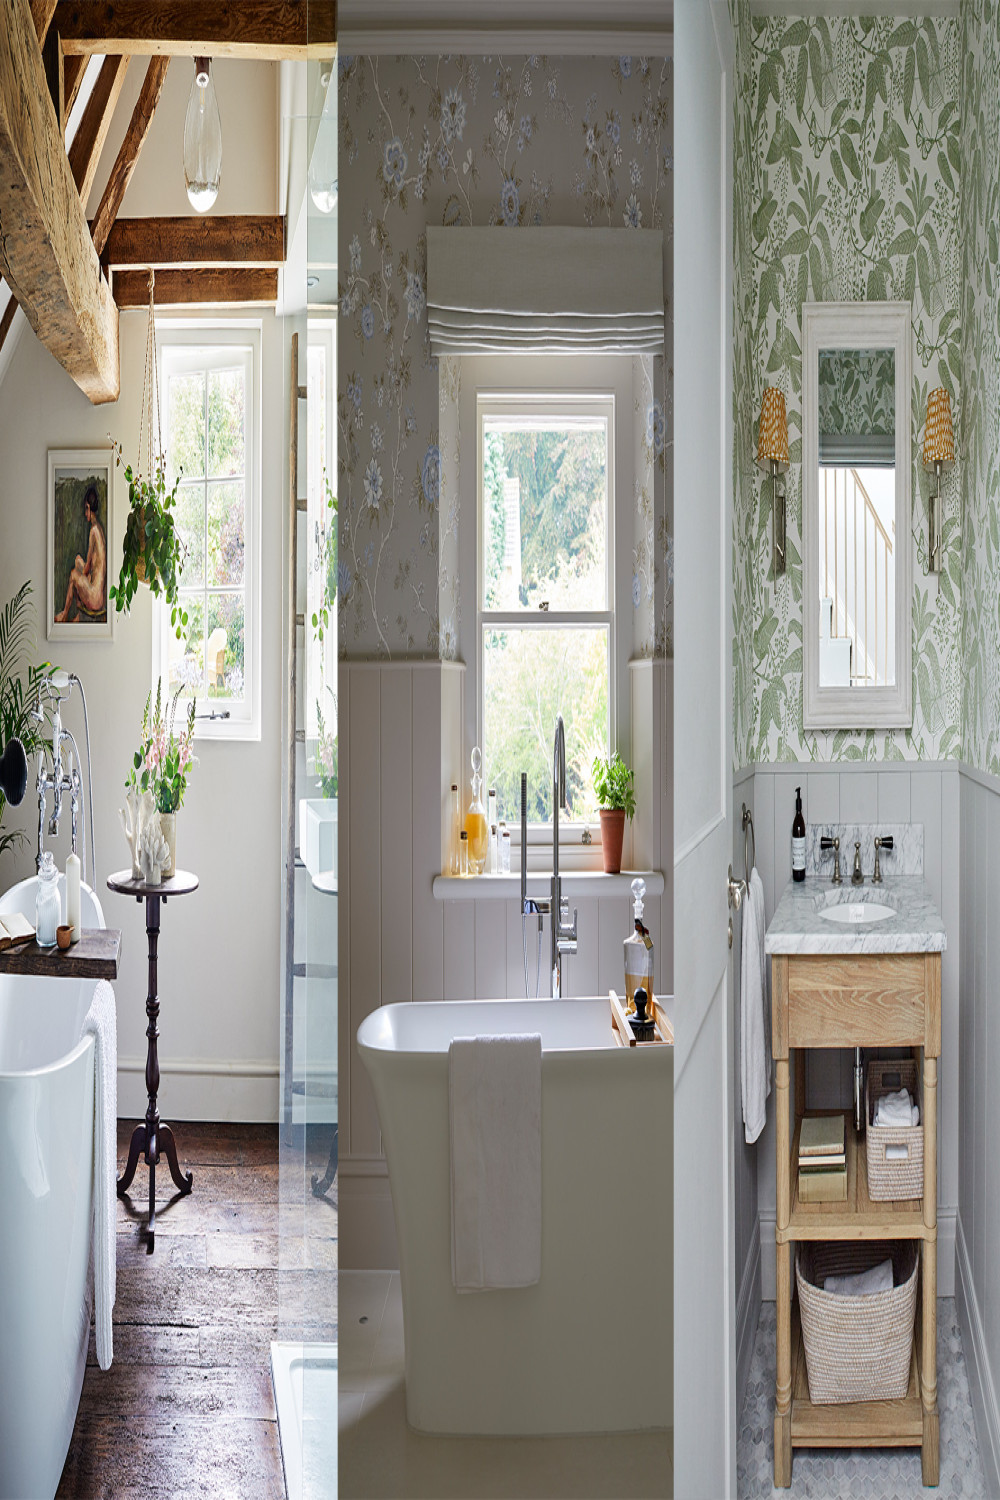 Cottage bathroom ideas:  practical spaces full of character